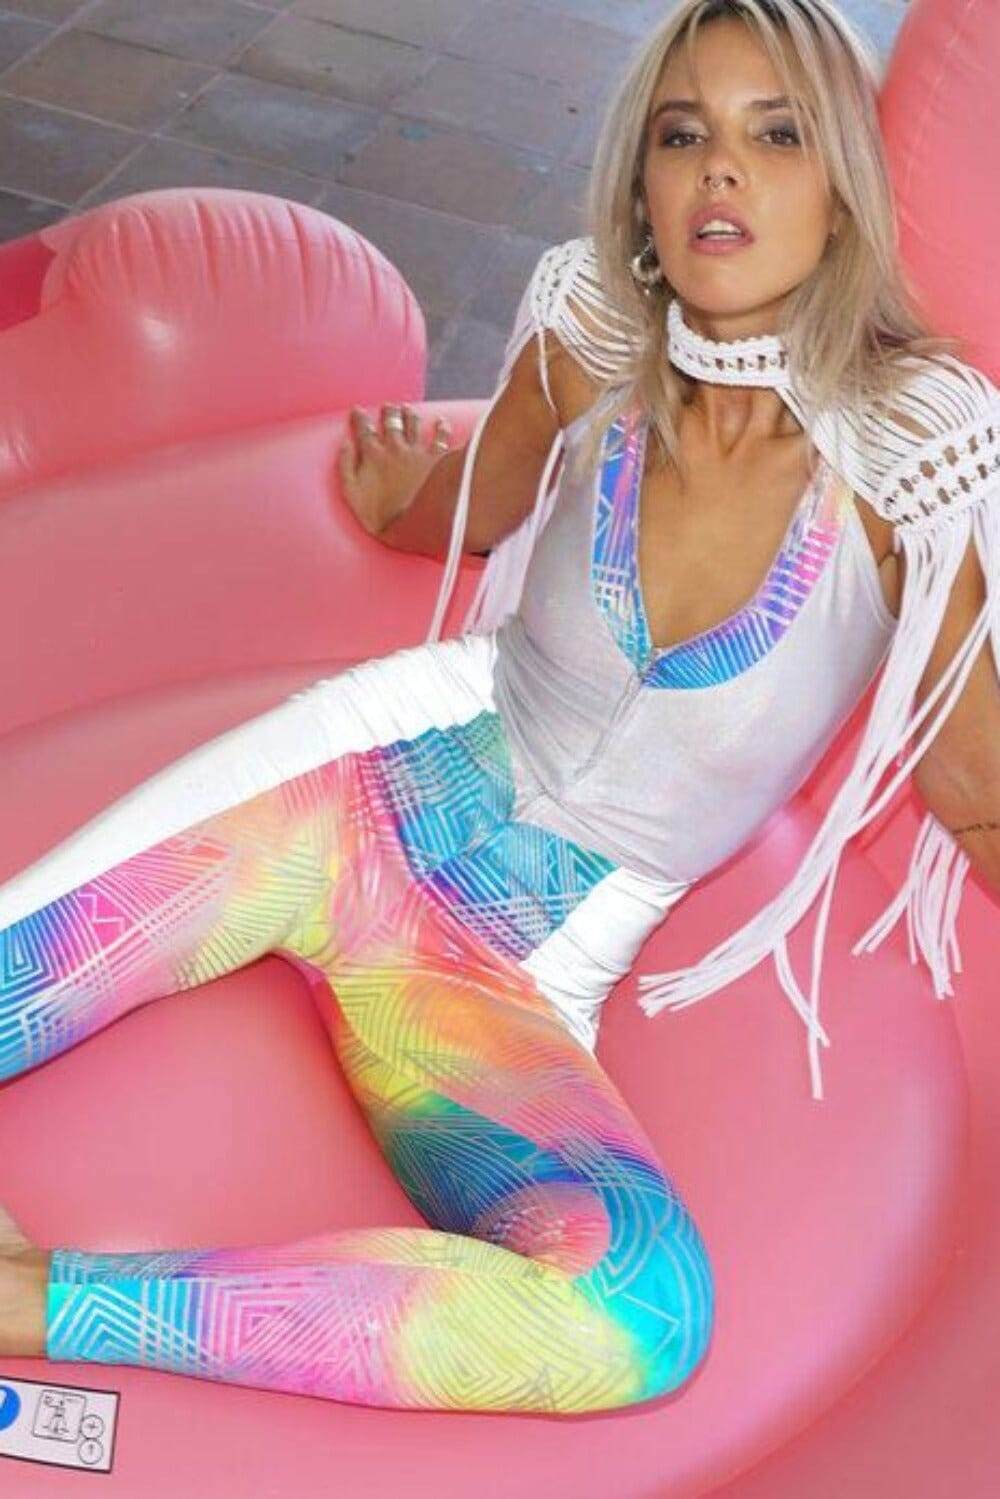 Holographic Neon Rainbow Catsuit for Festival wear, Rave outfits, and Burning Man Costumes by Love Khaos